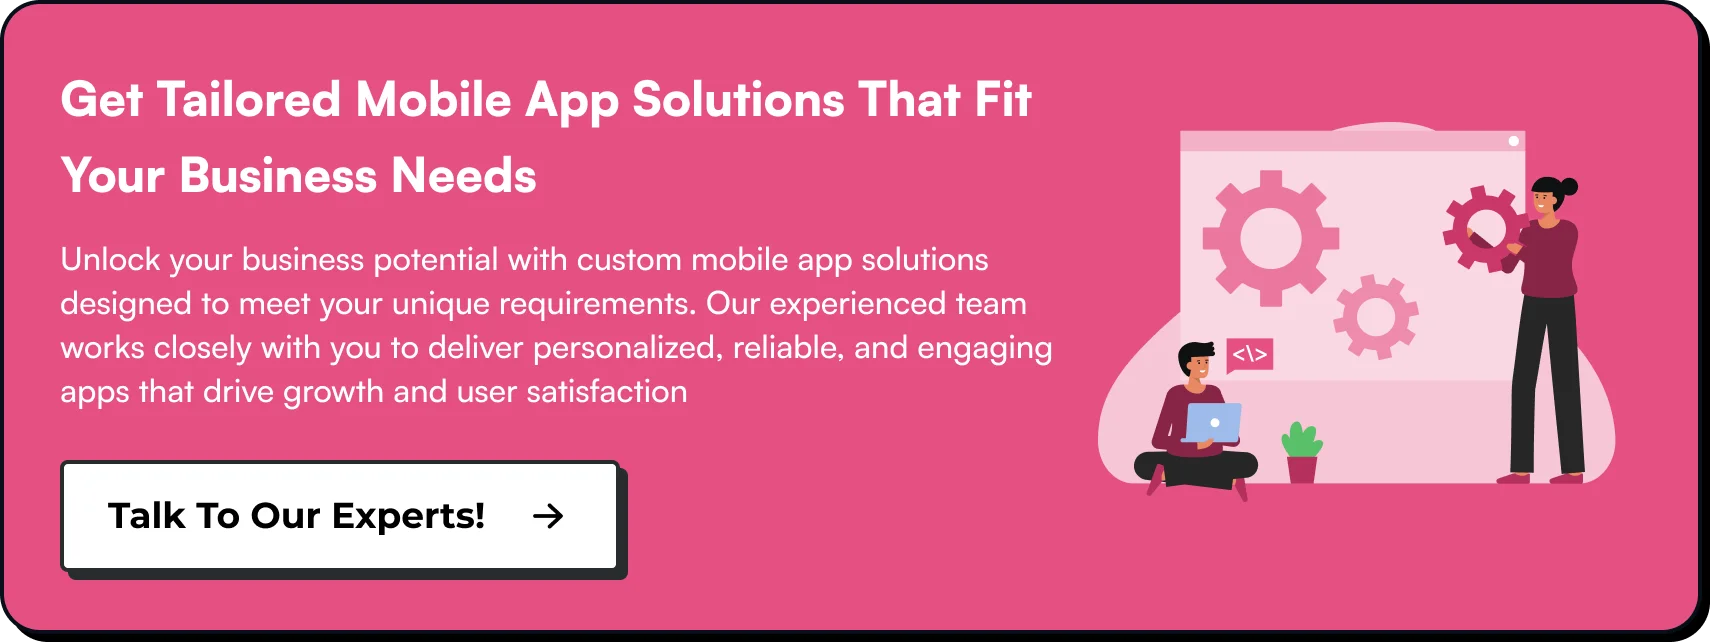 Get Tailored Mobile App Solutions That Fit Your Business Needs